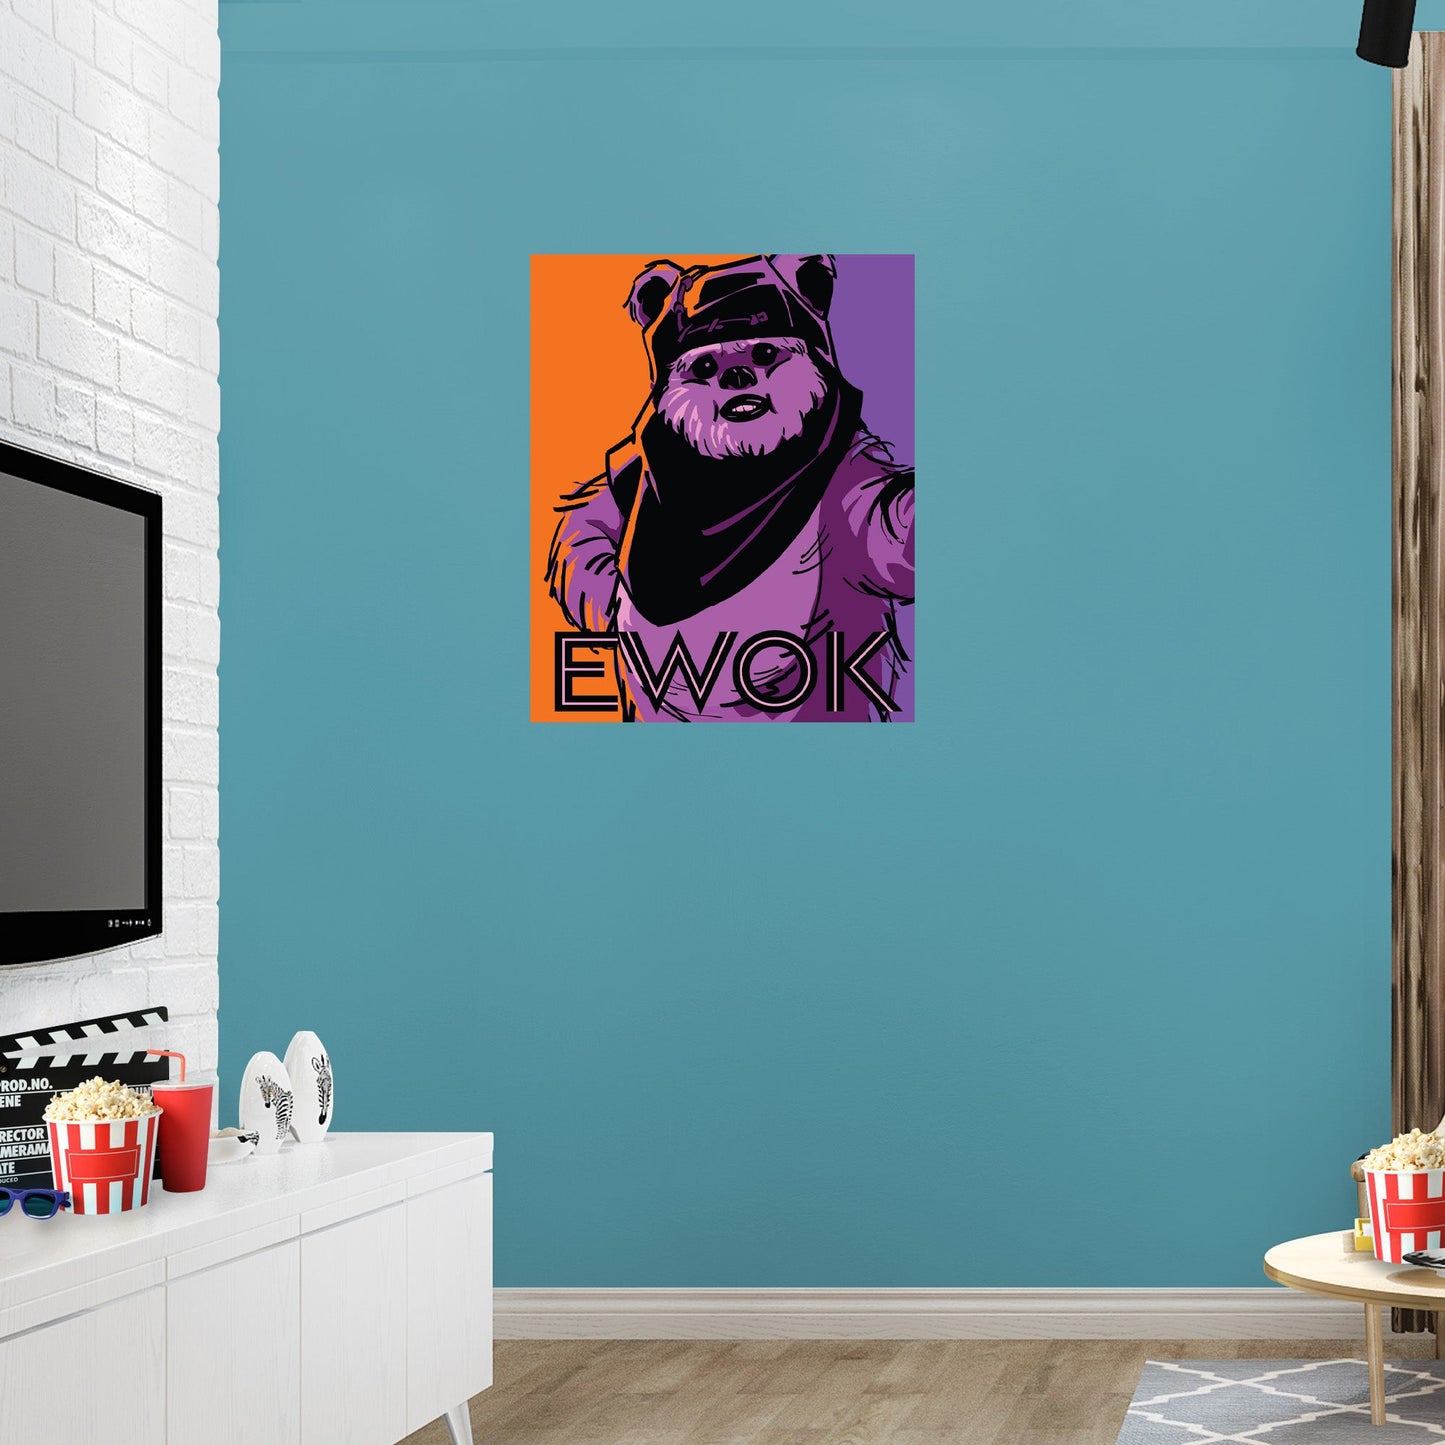 Ewok Pop Art Poster - Officially Licensed Star Wars Removable Adhesive Decal